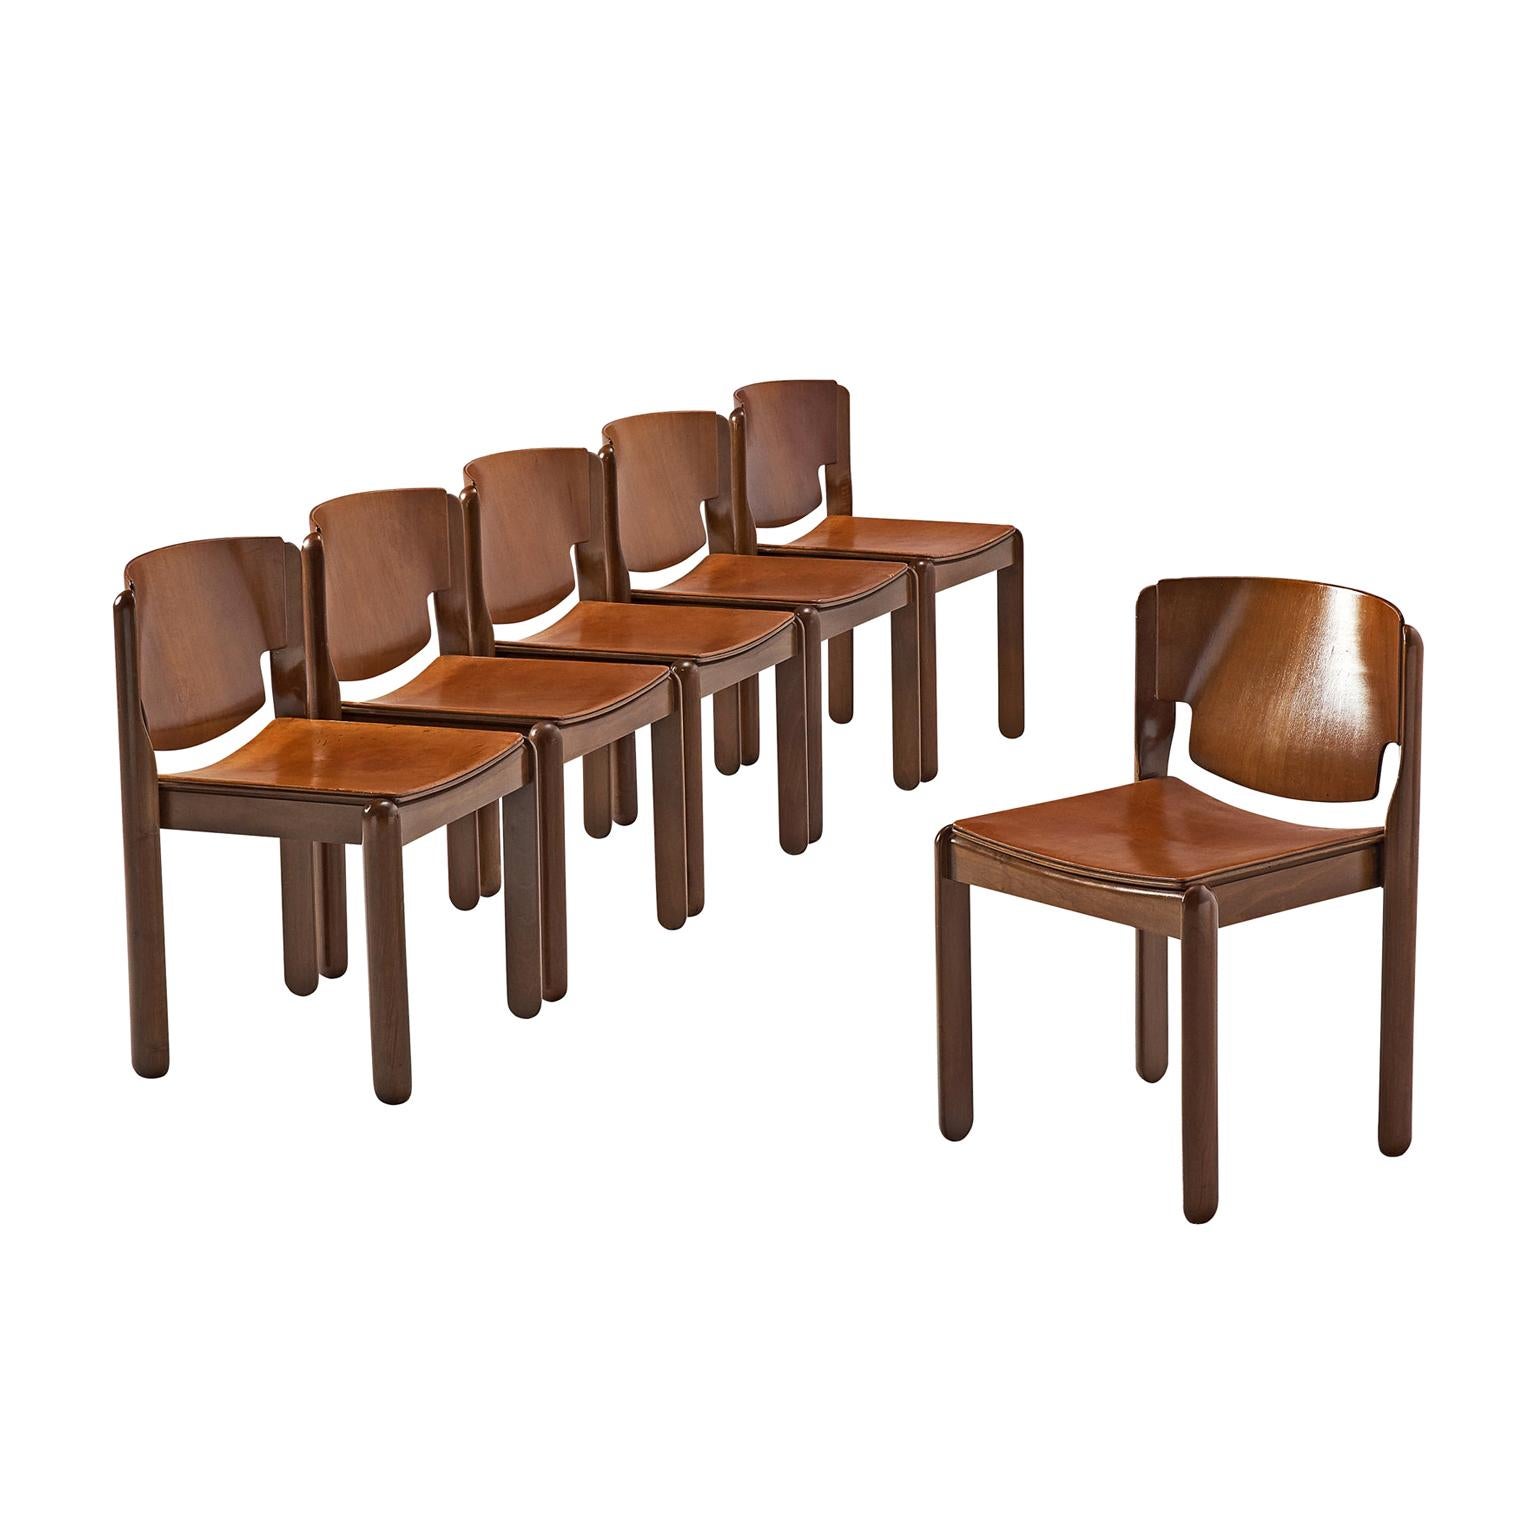 Set of Six Walnut Dining Chairs by Vico Magistretti for Cassina